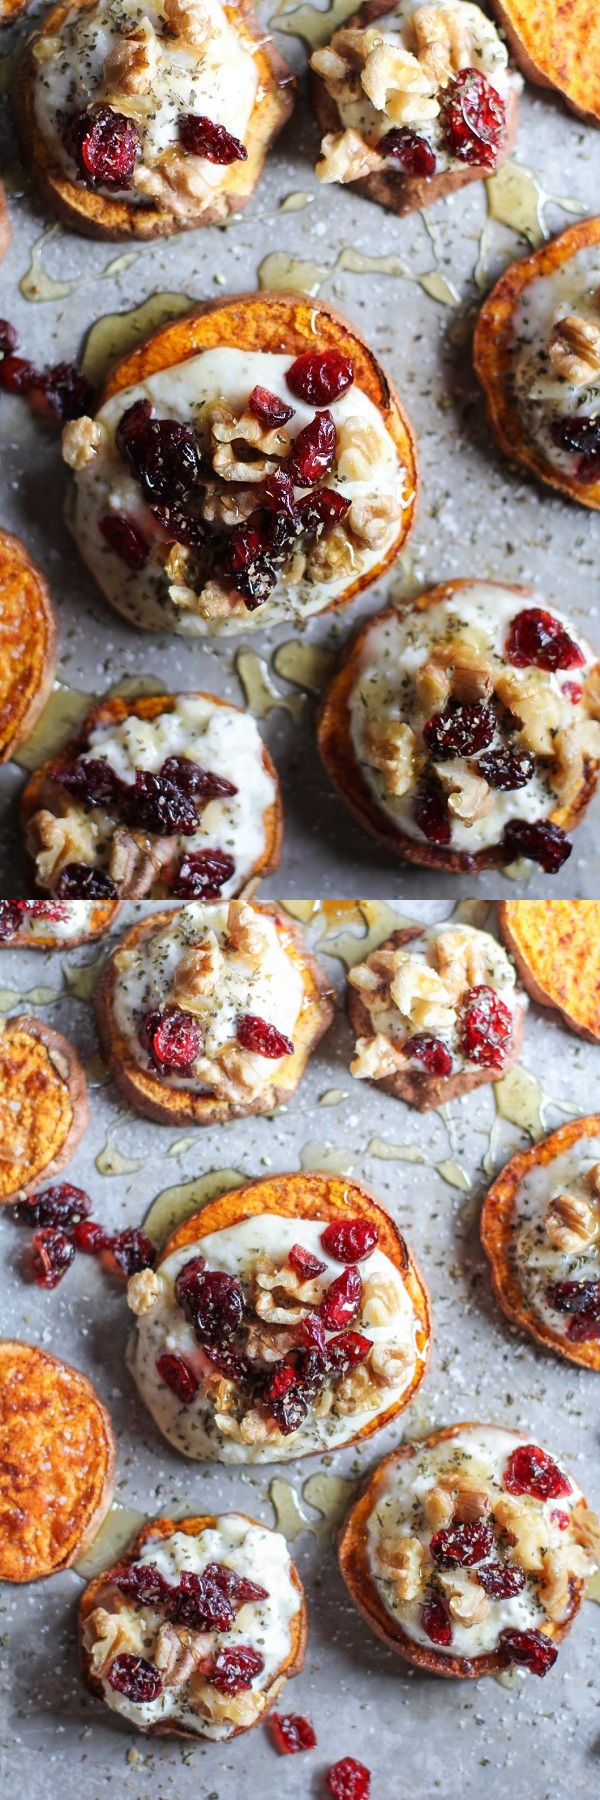 Sweet Potato Rounds with Herbed Ricotta and Walnuts